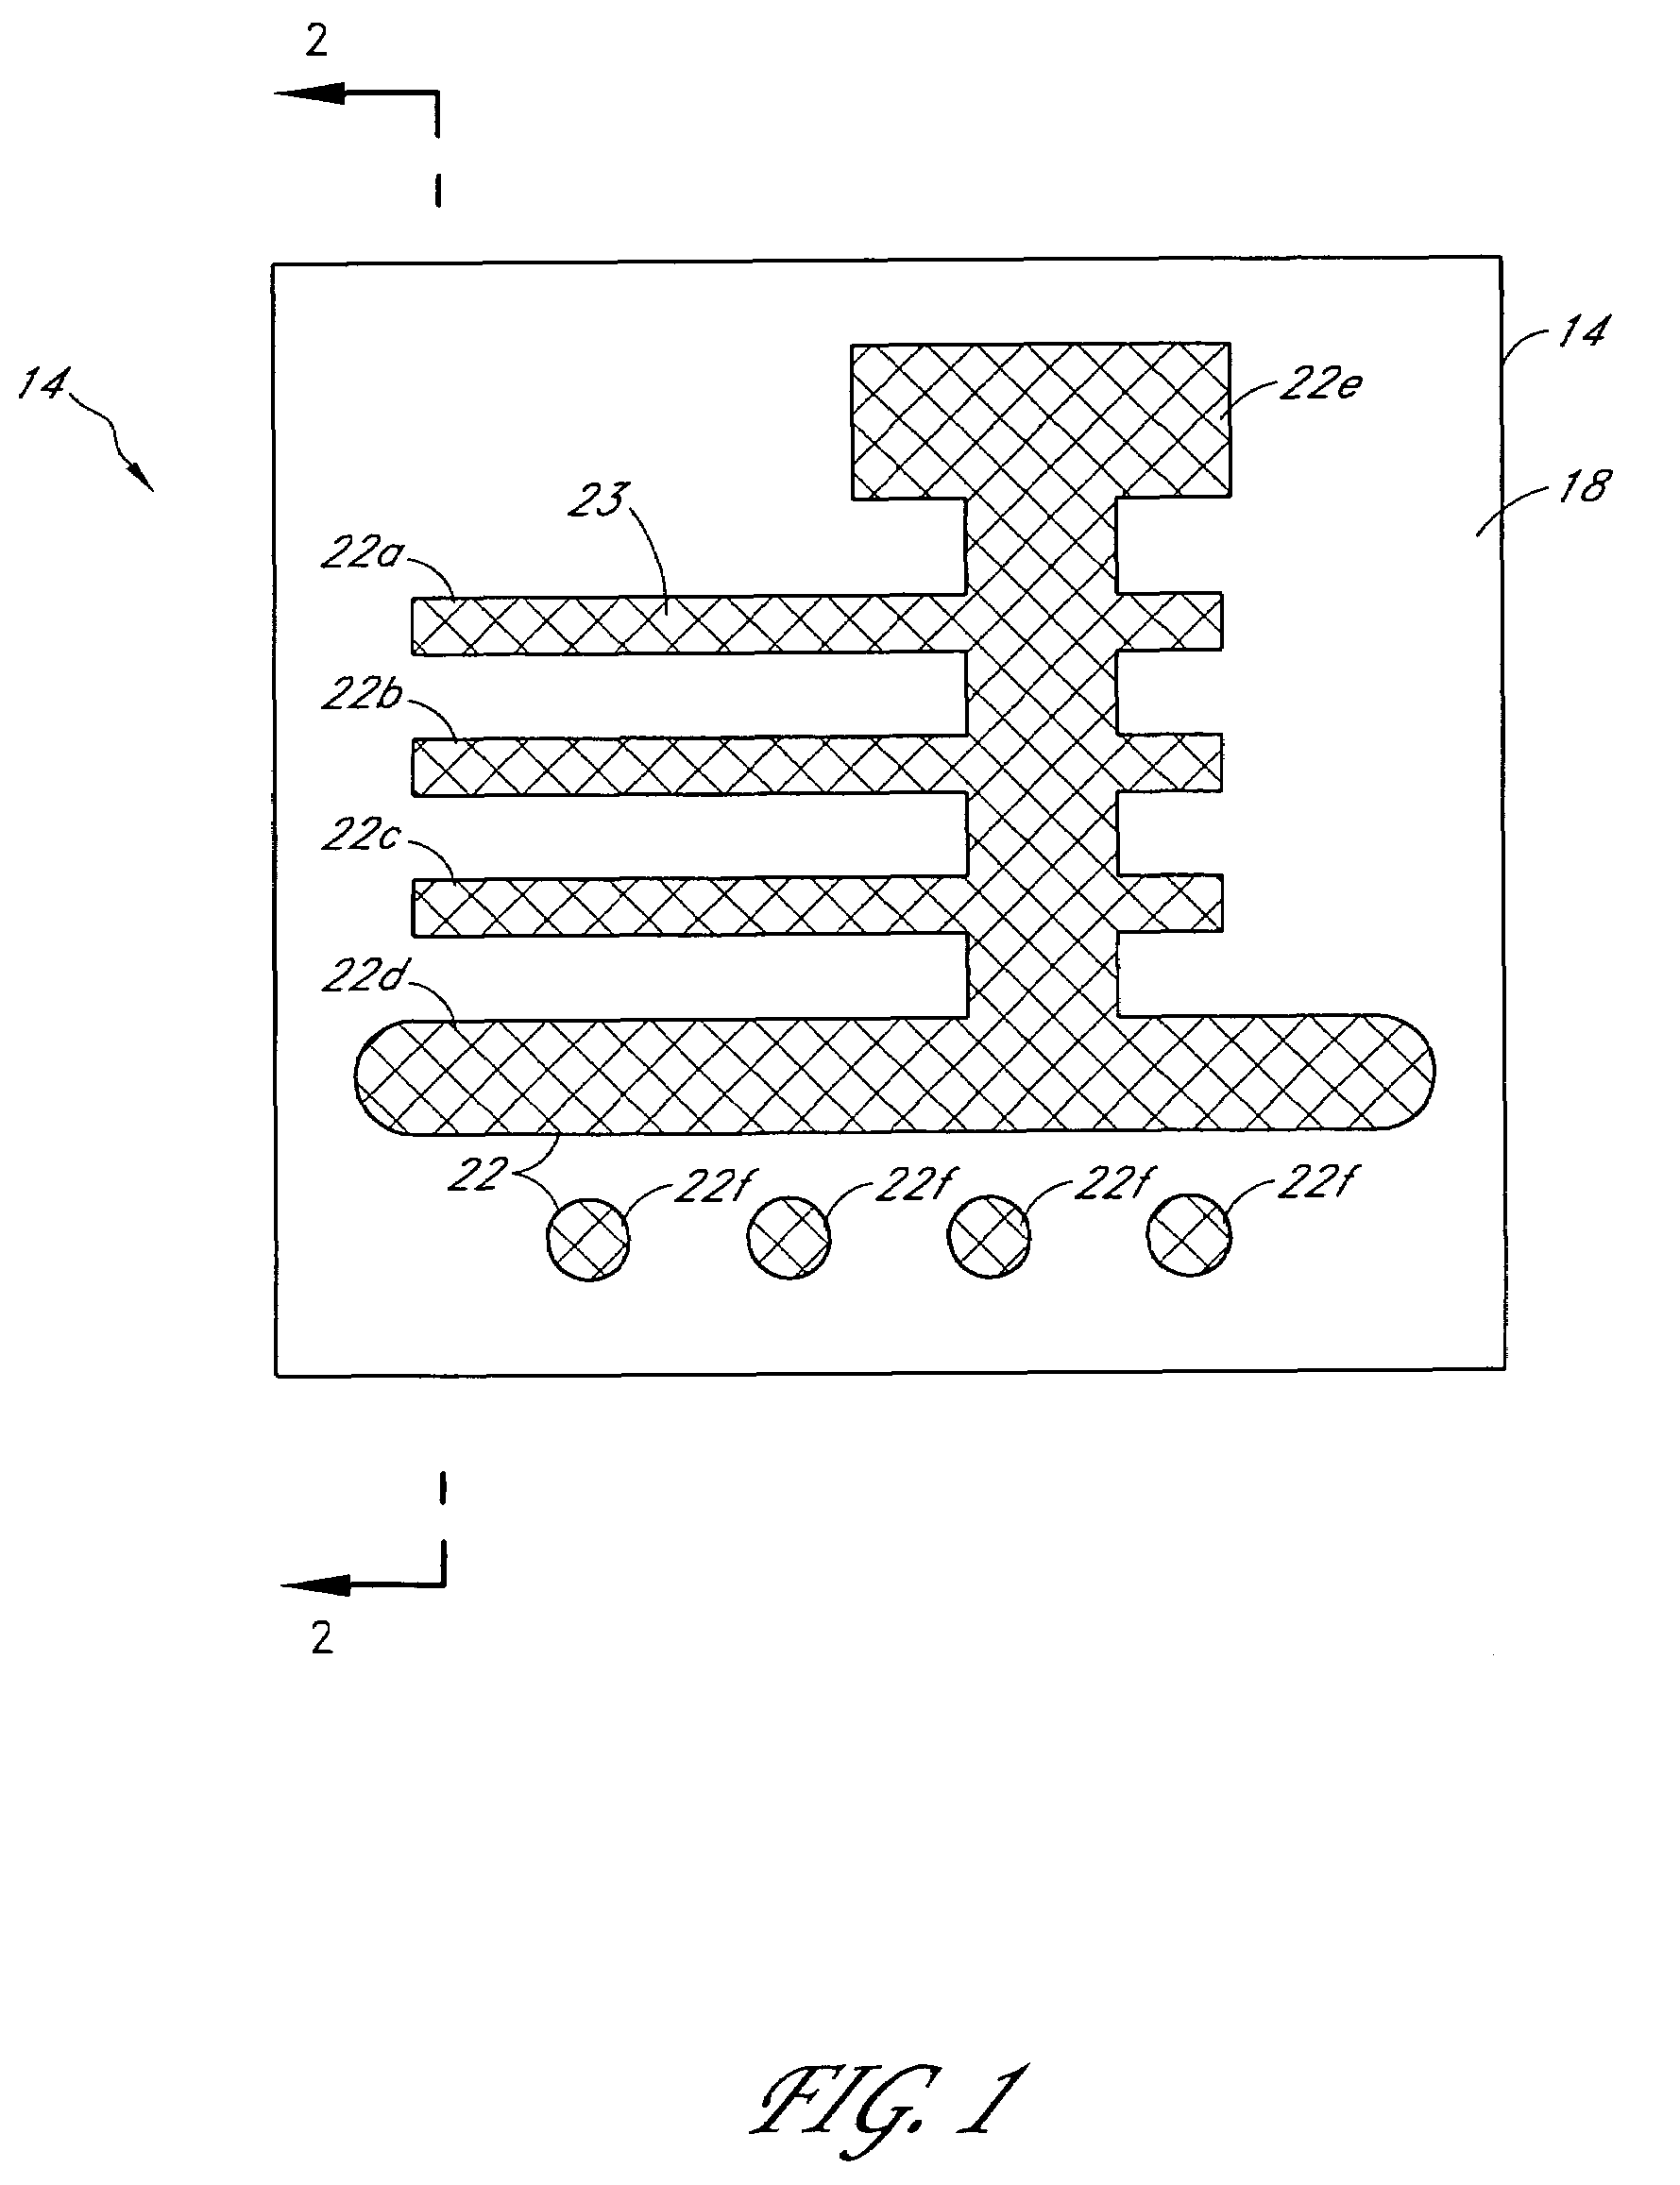 Photolithographic systems and methods for producing sub-diffraction-limited features